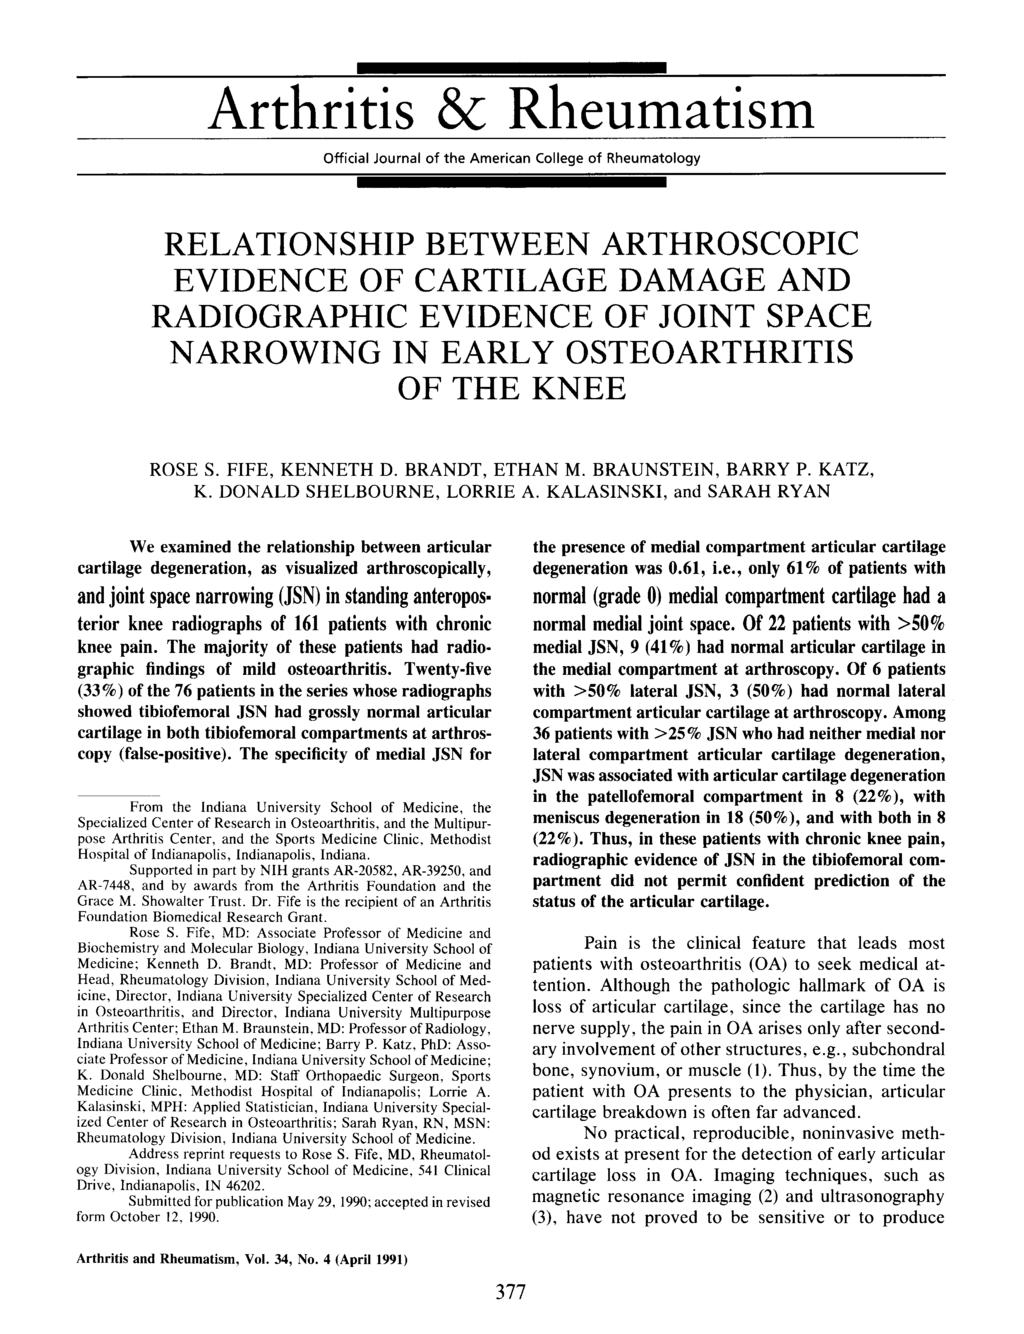 ~ Arthritis & Rheumatism Official Journal of the American College of Rheumatology RELATIONSHIP BETWEEN ARTHROSCOPIC EVIDENCE OF CARTILAGE DAMAGE AND RADIOGRAPHIC EVIDENCE OF JOINT SPACE NARROWING IN